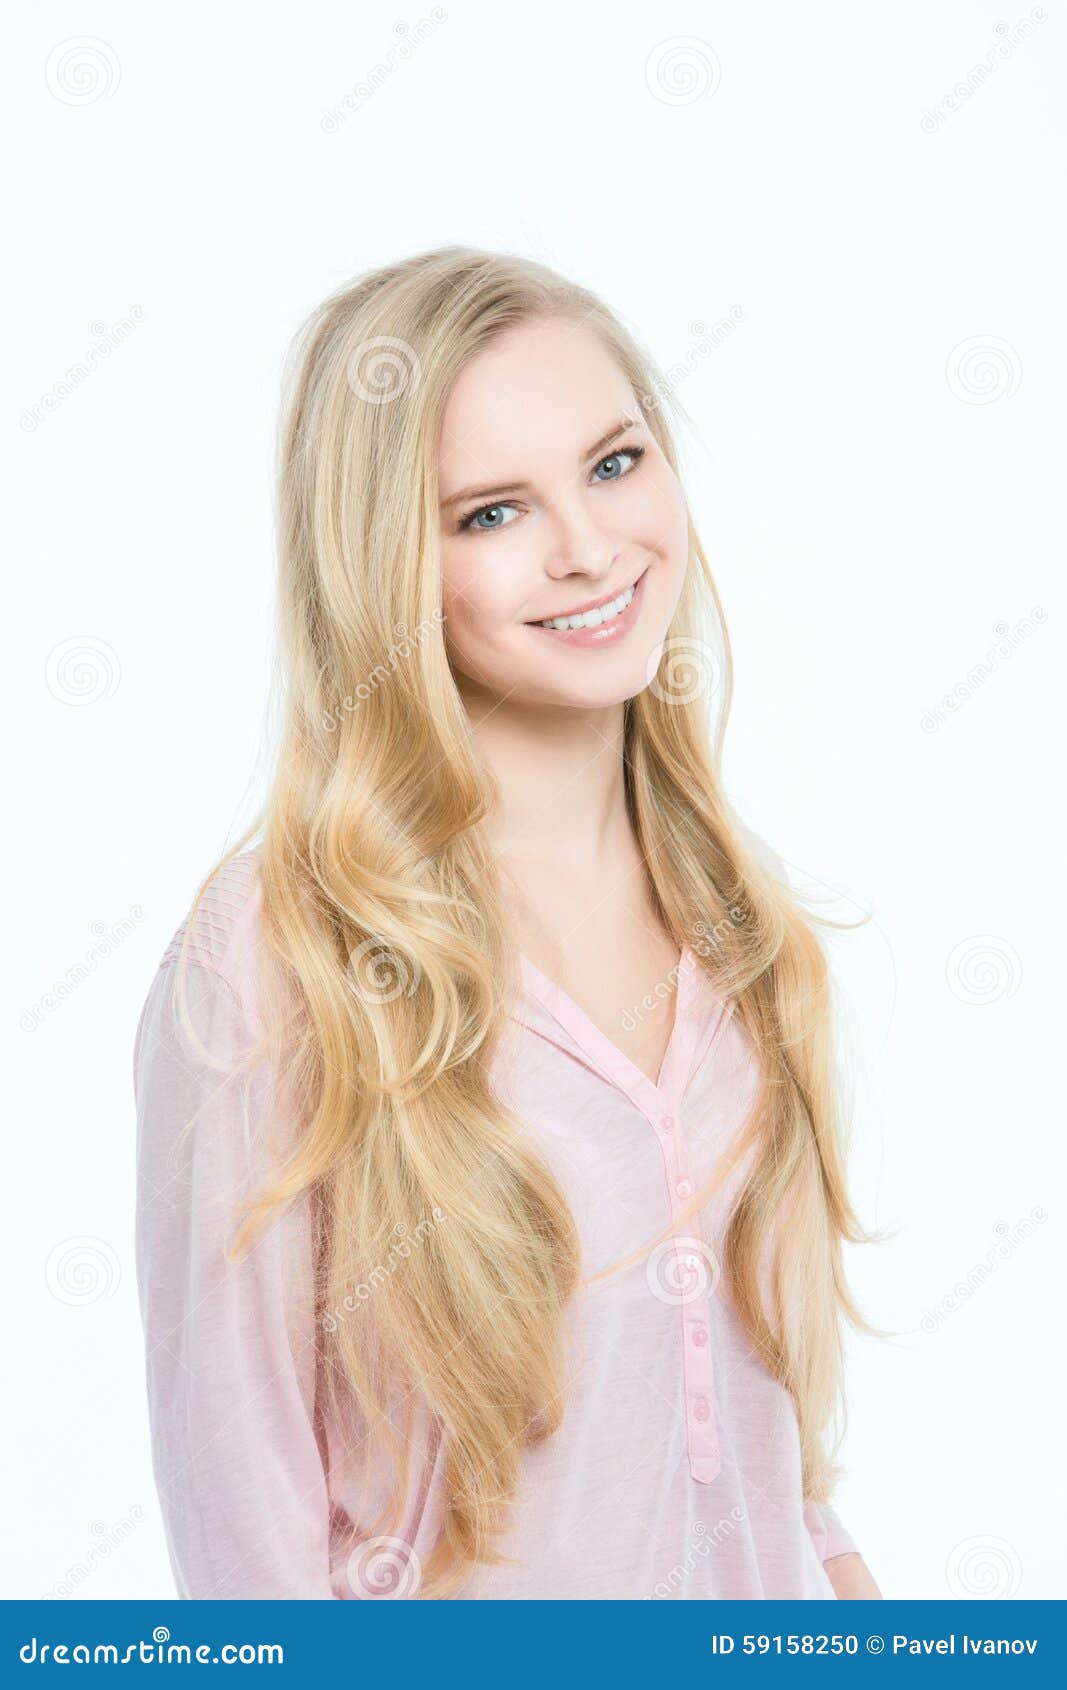 Cute Girl Smiling Stock Photo Image Of People Model 9945 Hot Sex Picture pic image picture